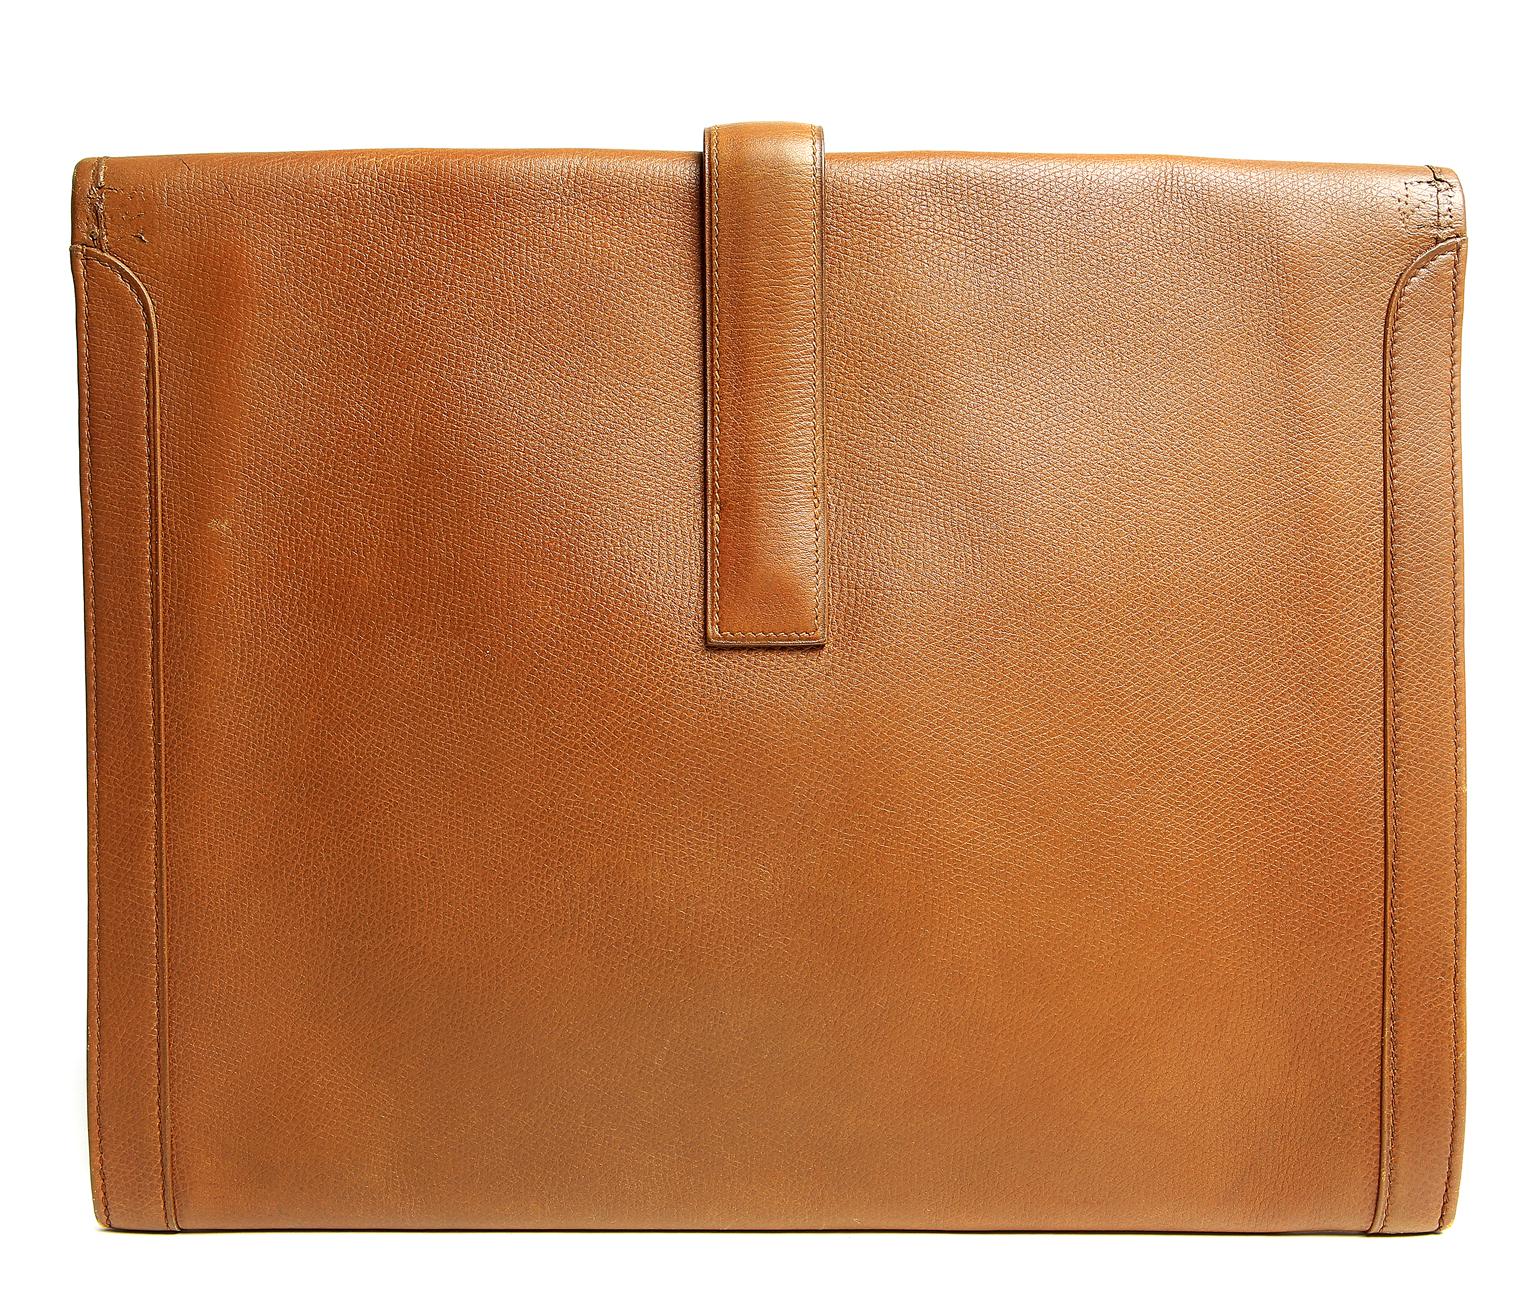 Hermes Vintage Cognac Leather Jumbo Jige Clutch - pristine condition The unisex style is perfect for carrying documents as well as personal belongings. Golden cognac leather has a fine grained texture and is complementary with nearly every other